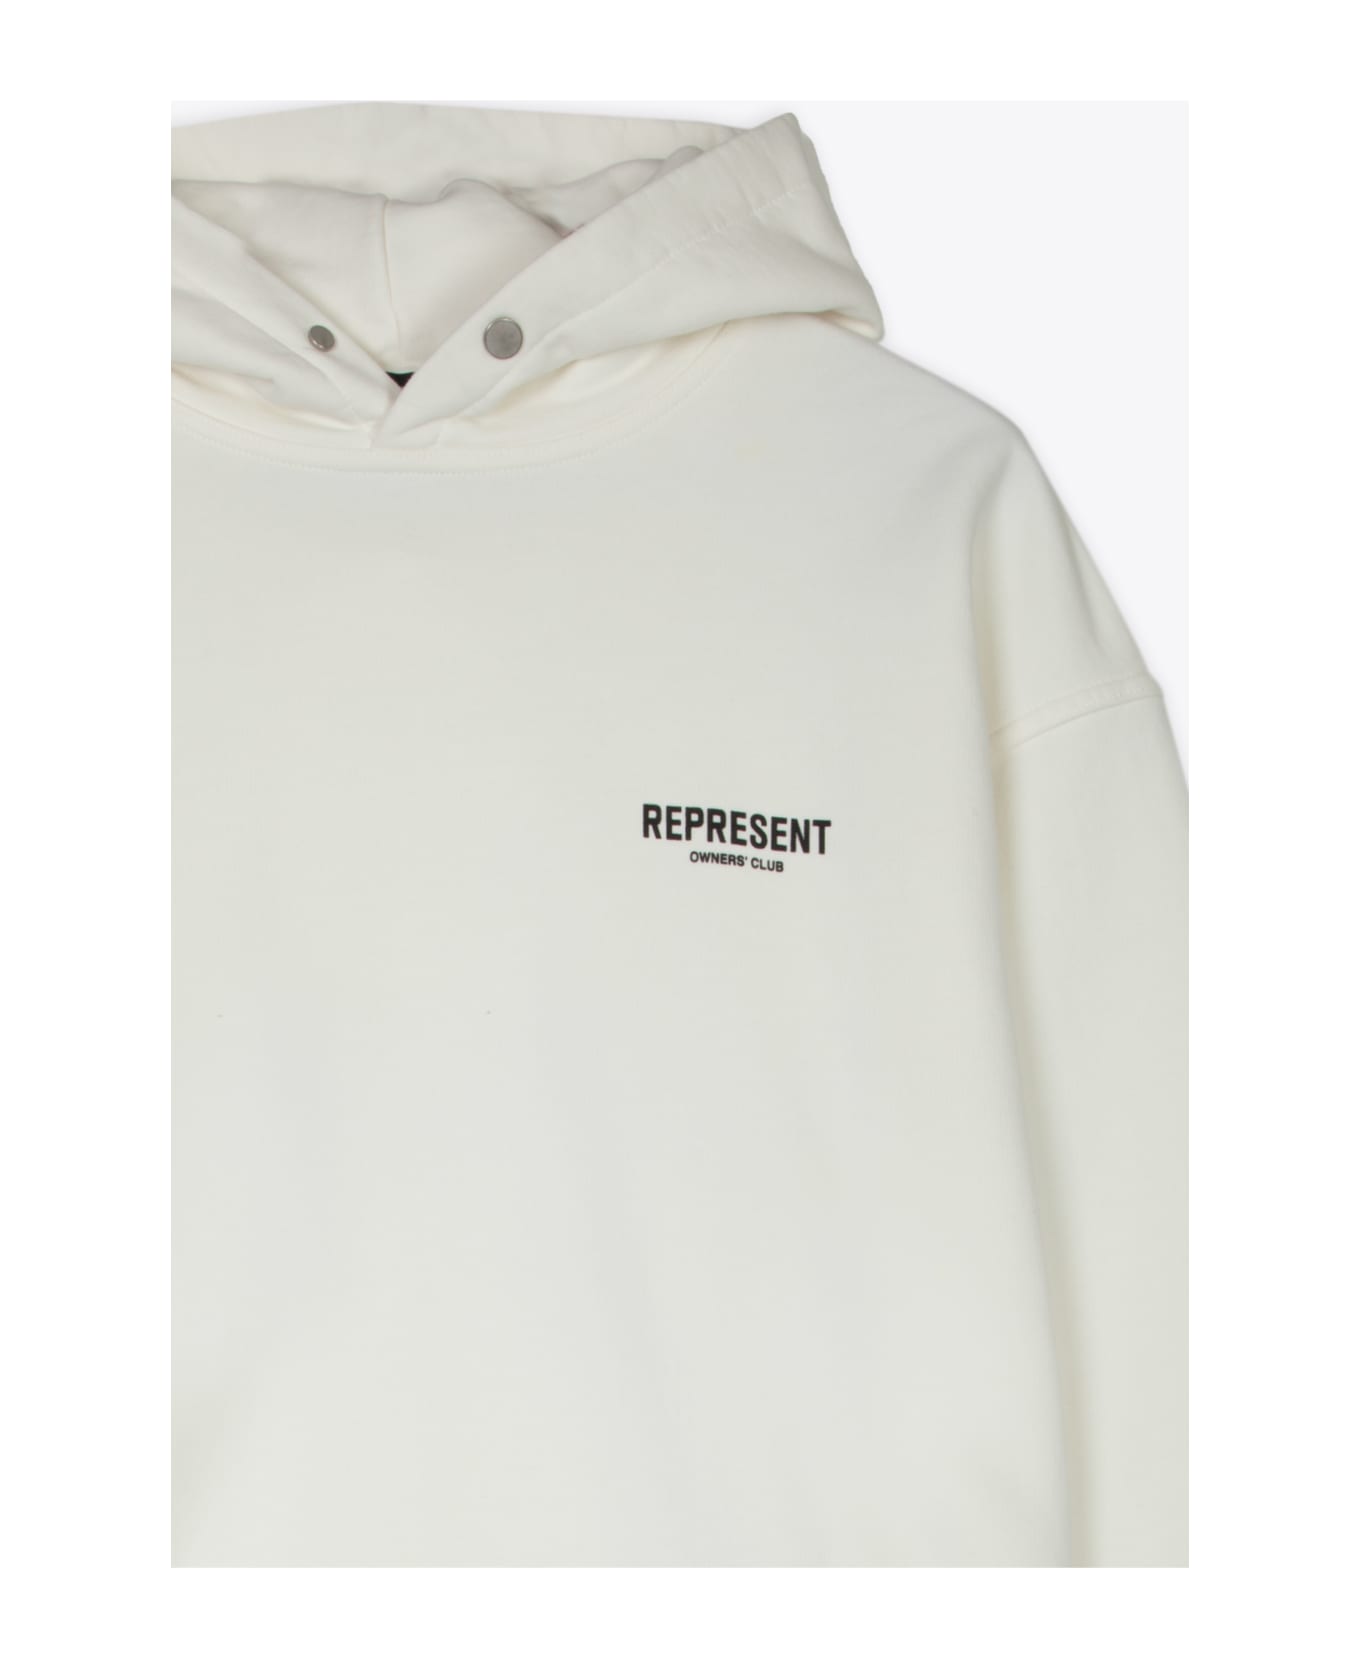 REPRESENT Owners Club Hoodie White cotton hoodie with logo - Owners Club Hoodie - Bianco フリース